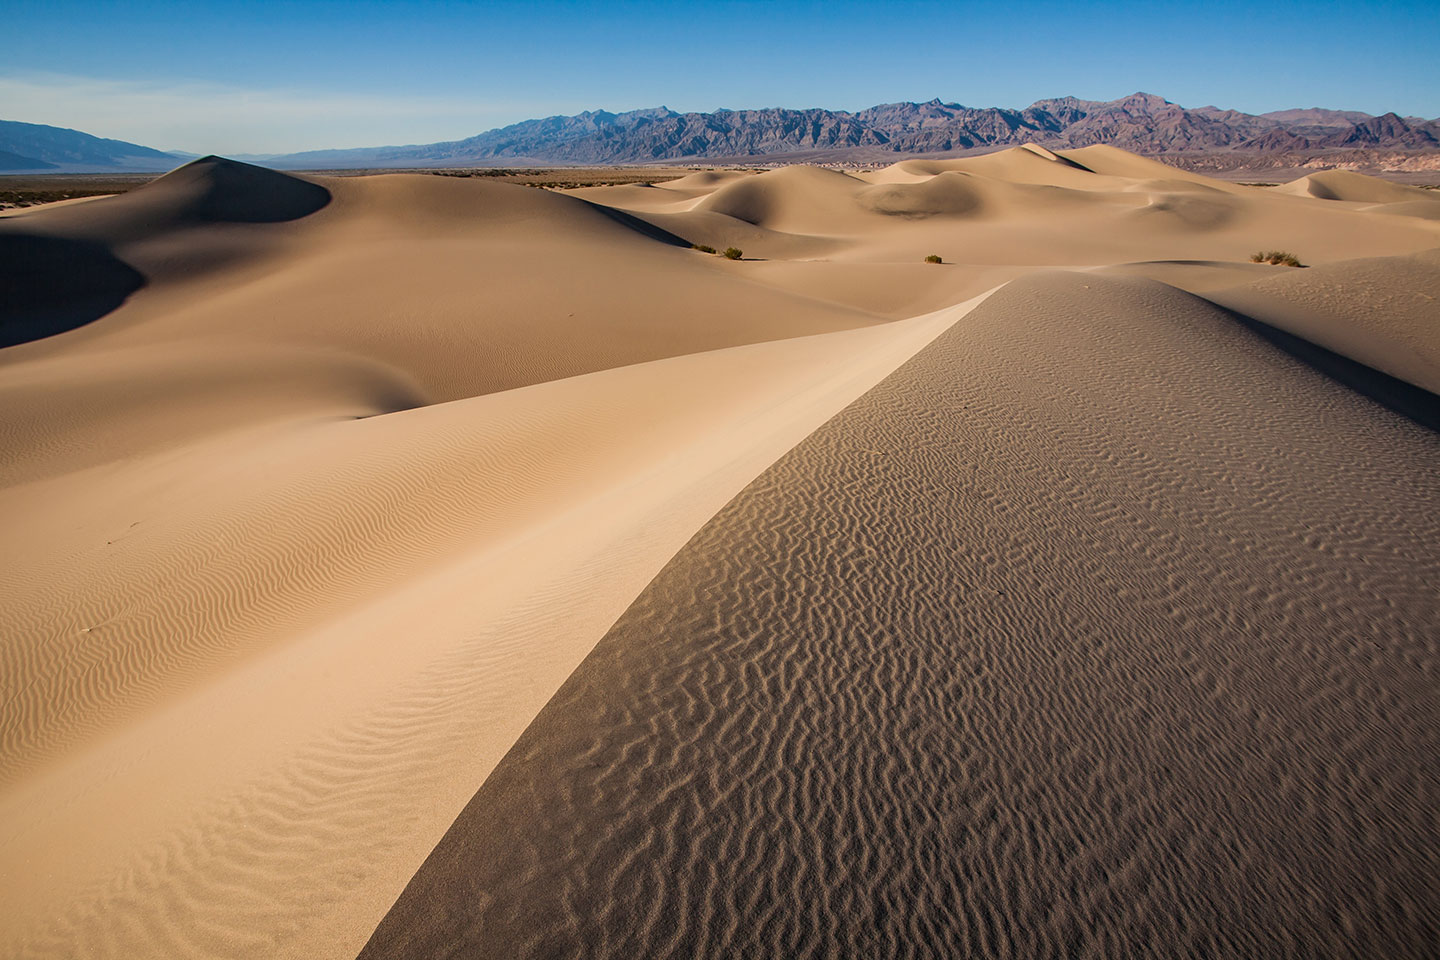 Sand dunes in Death Valley National Park in California